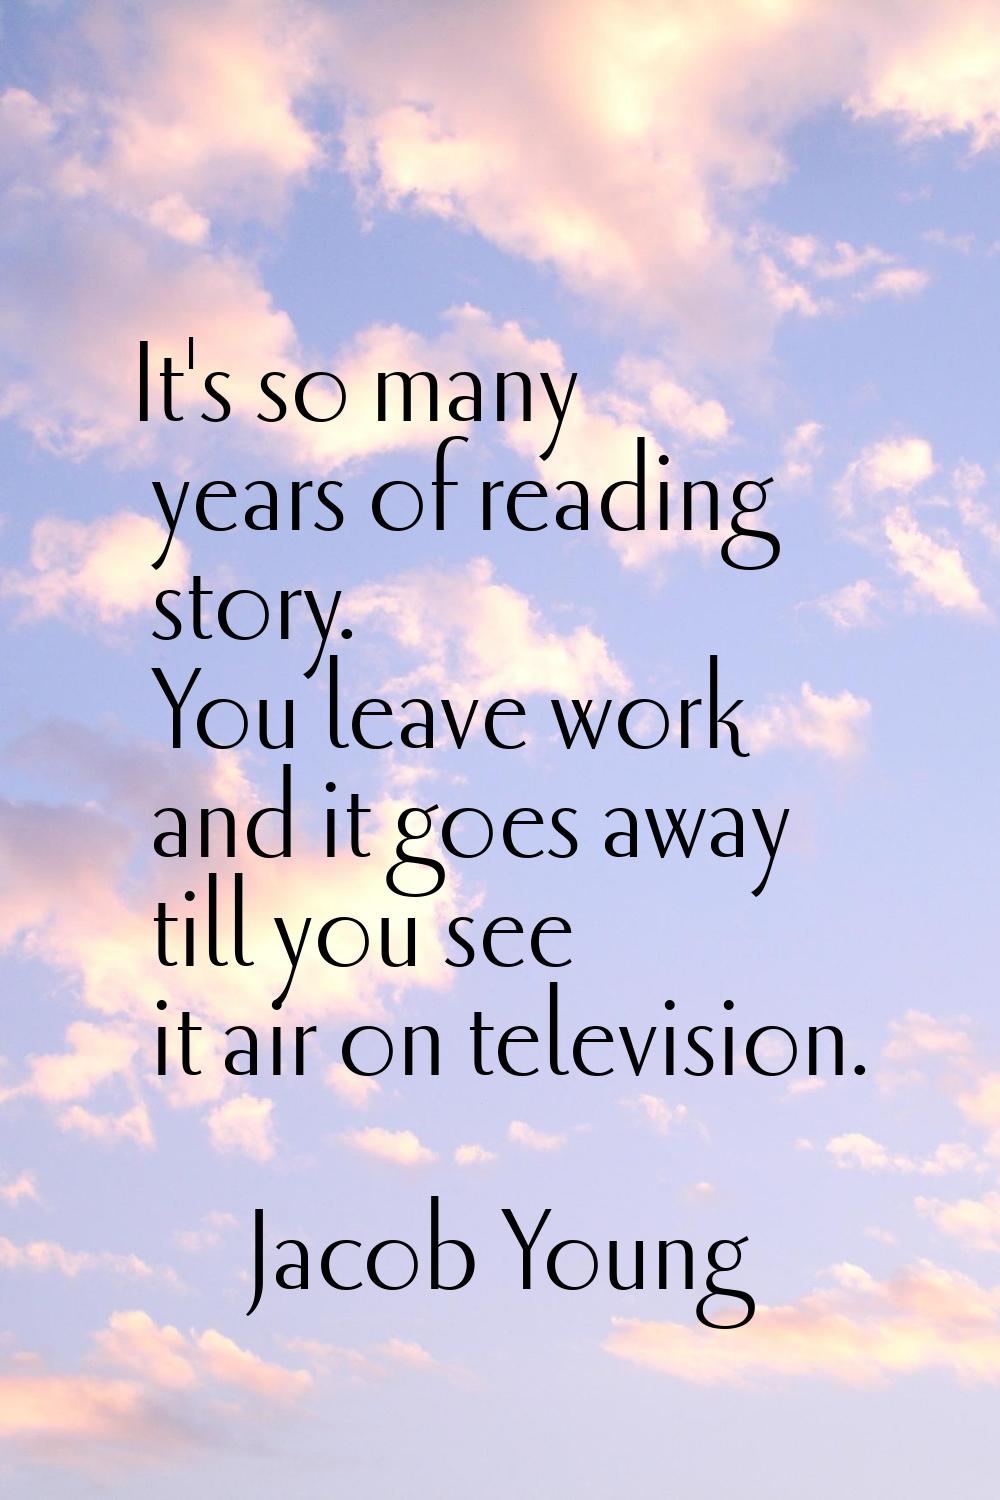 It's so many years of reading story. You leave work and it goes away till you see it air on televis